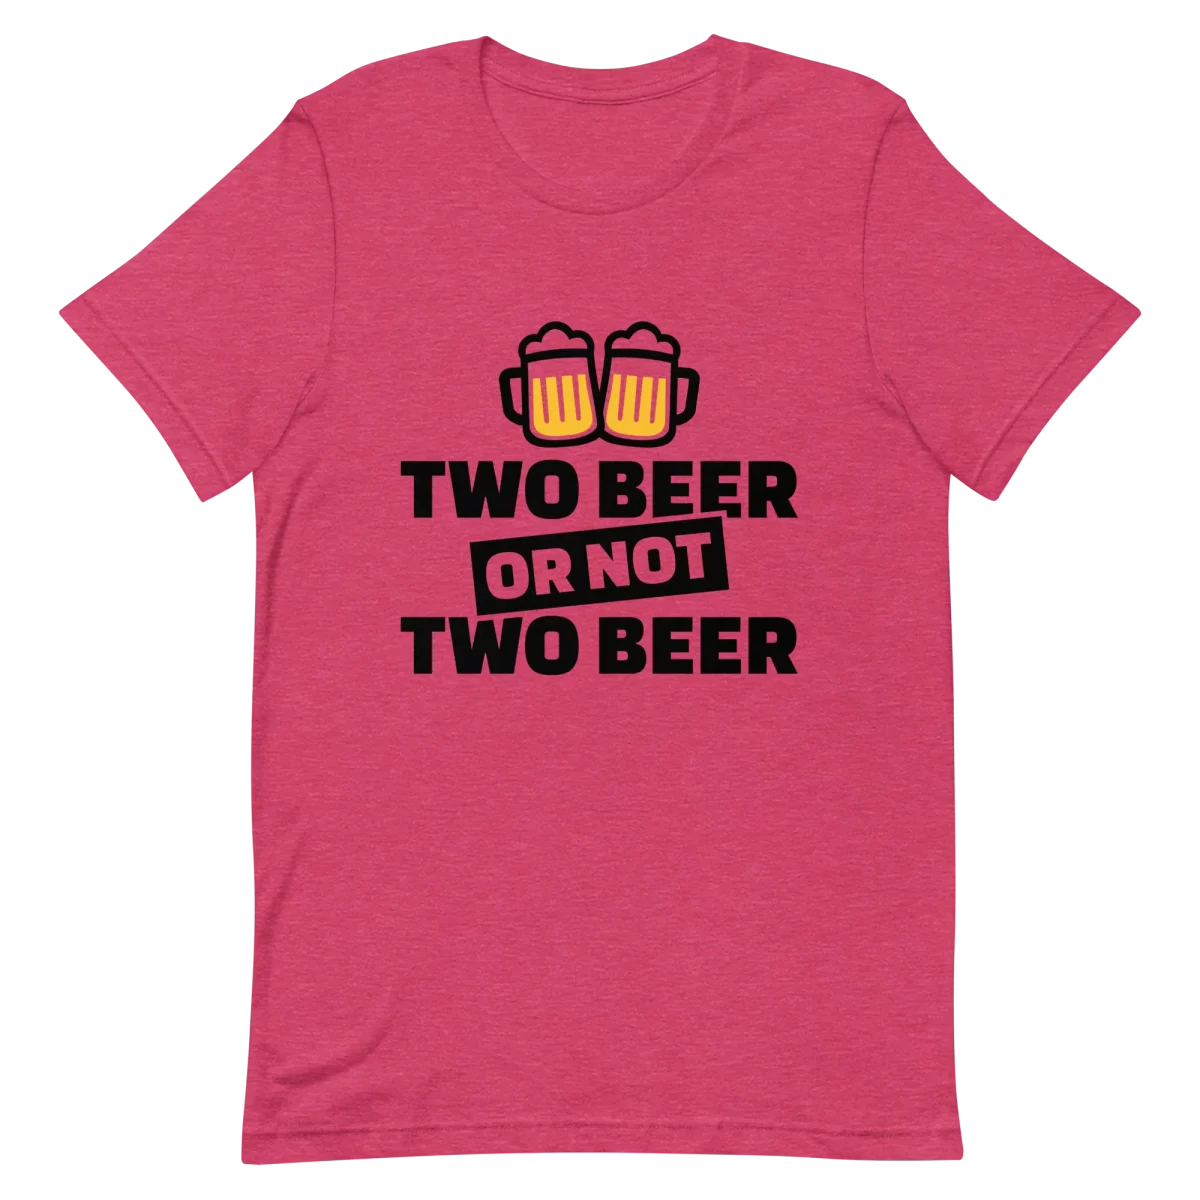 Unisex T-Shirt - Two Beer or Not to Beer - Heather Raspberry